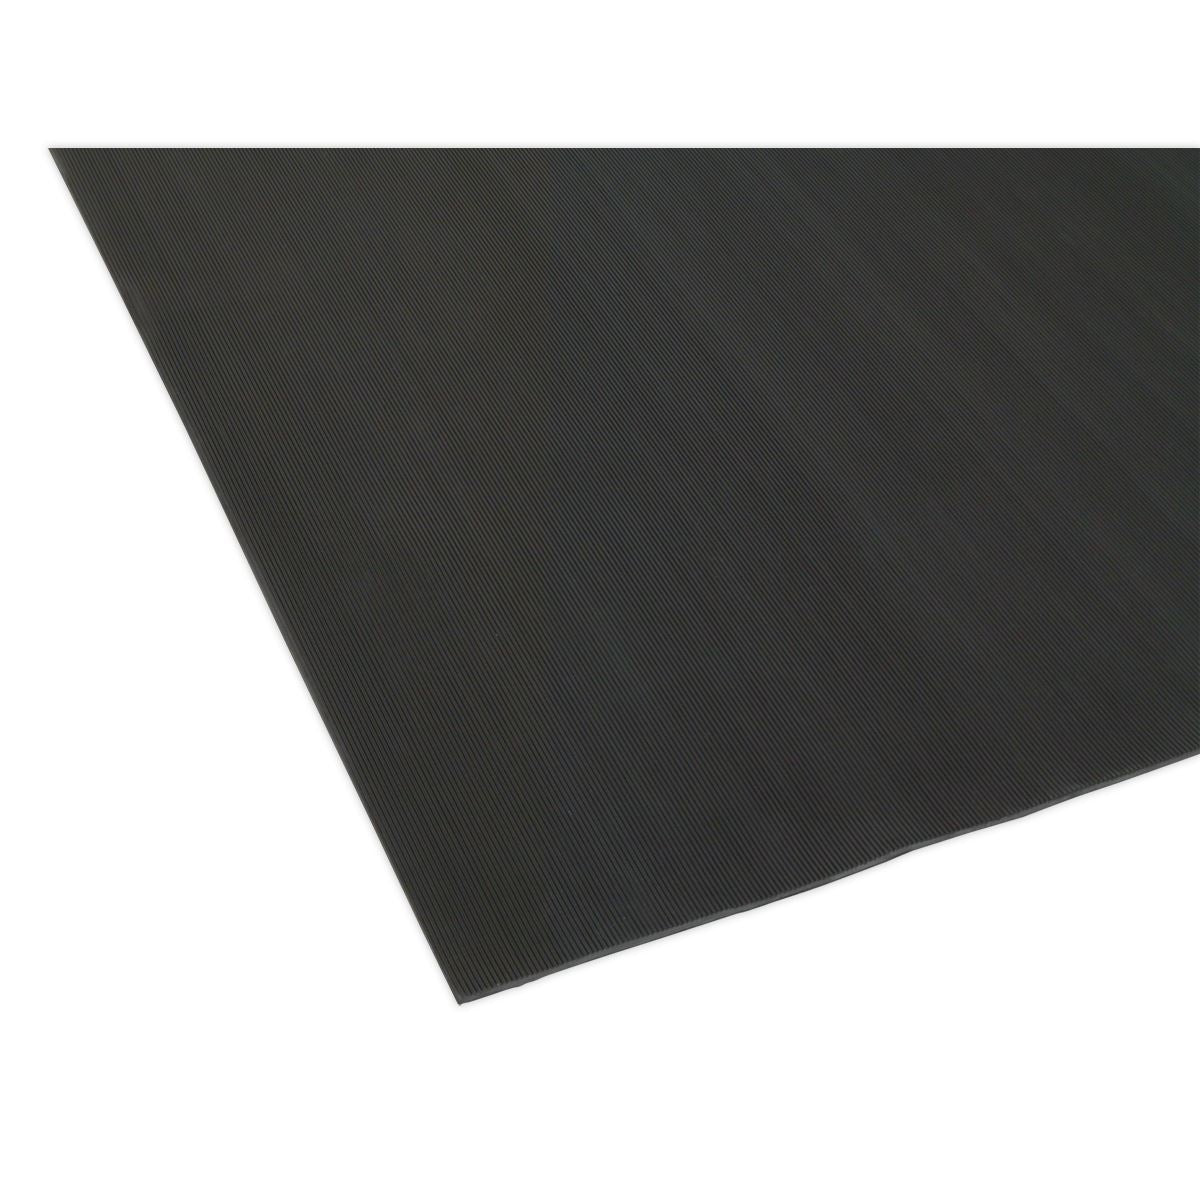 Sealey Electrician's Insulating Rubber Safety Mat 1 x 1m